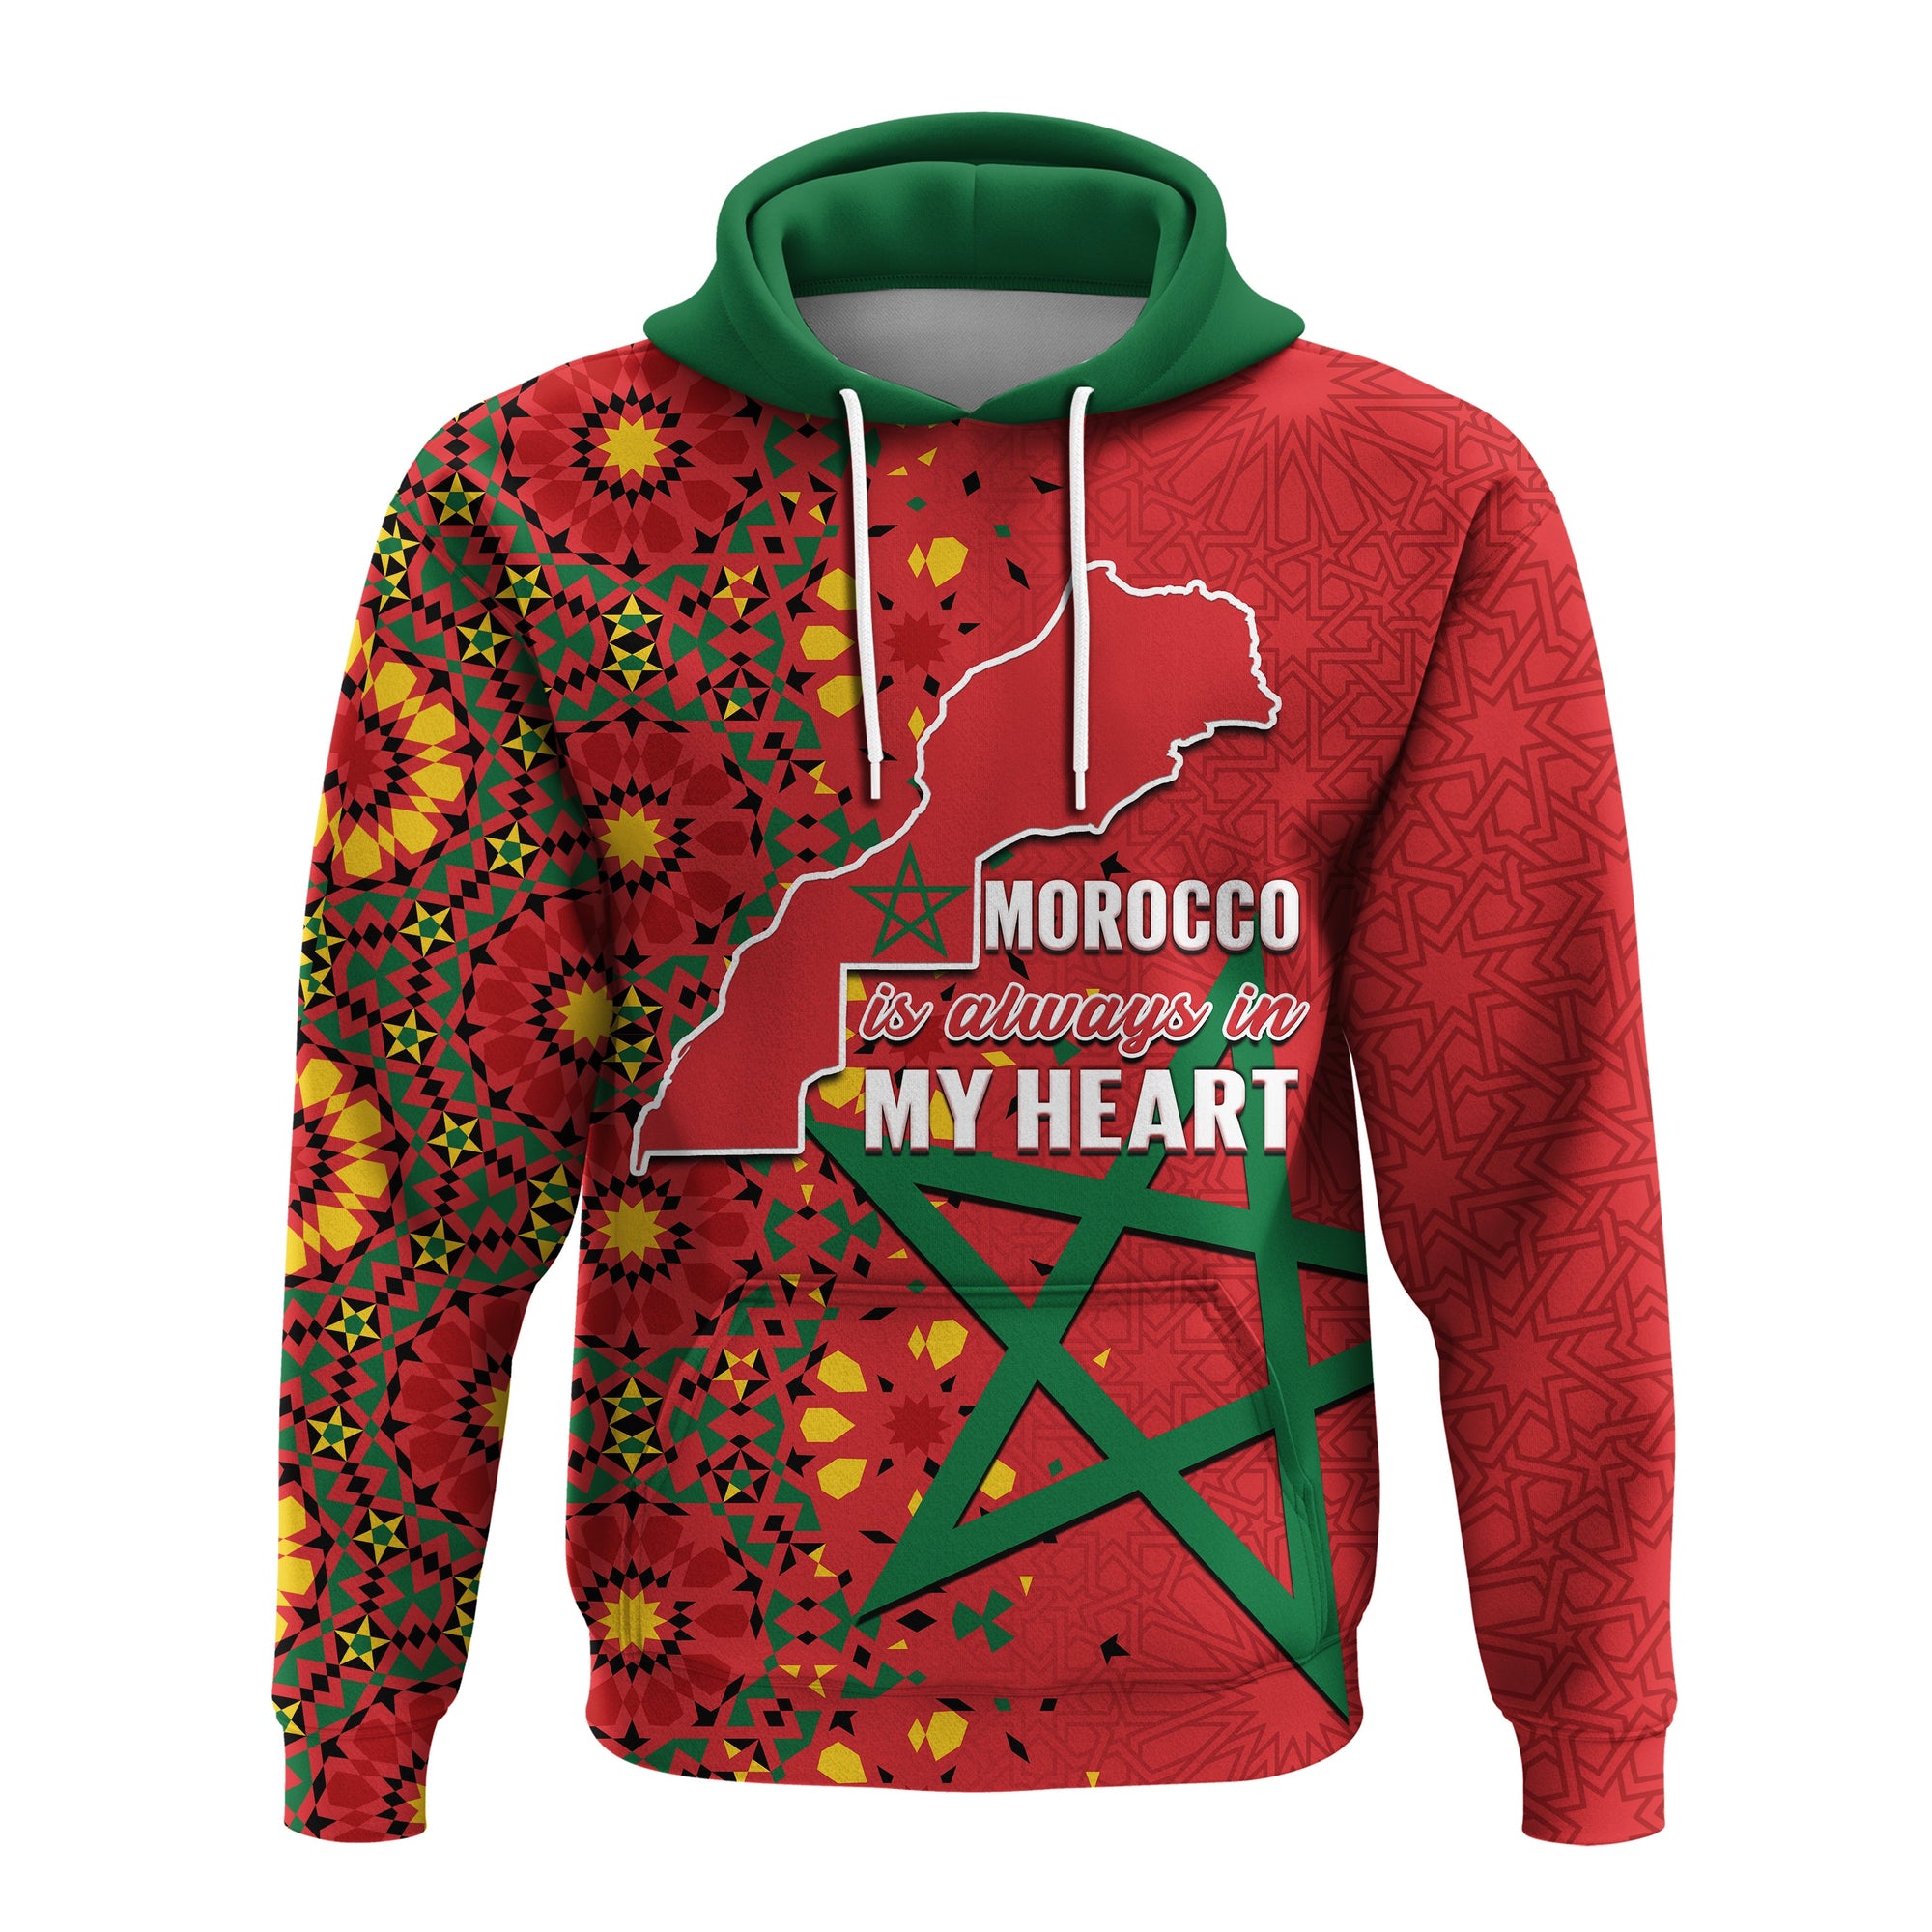 morocco-western-sahara-hoodie-map-red-moroccan-is-always-in-my-heart